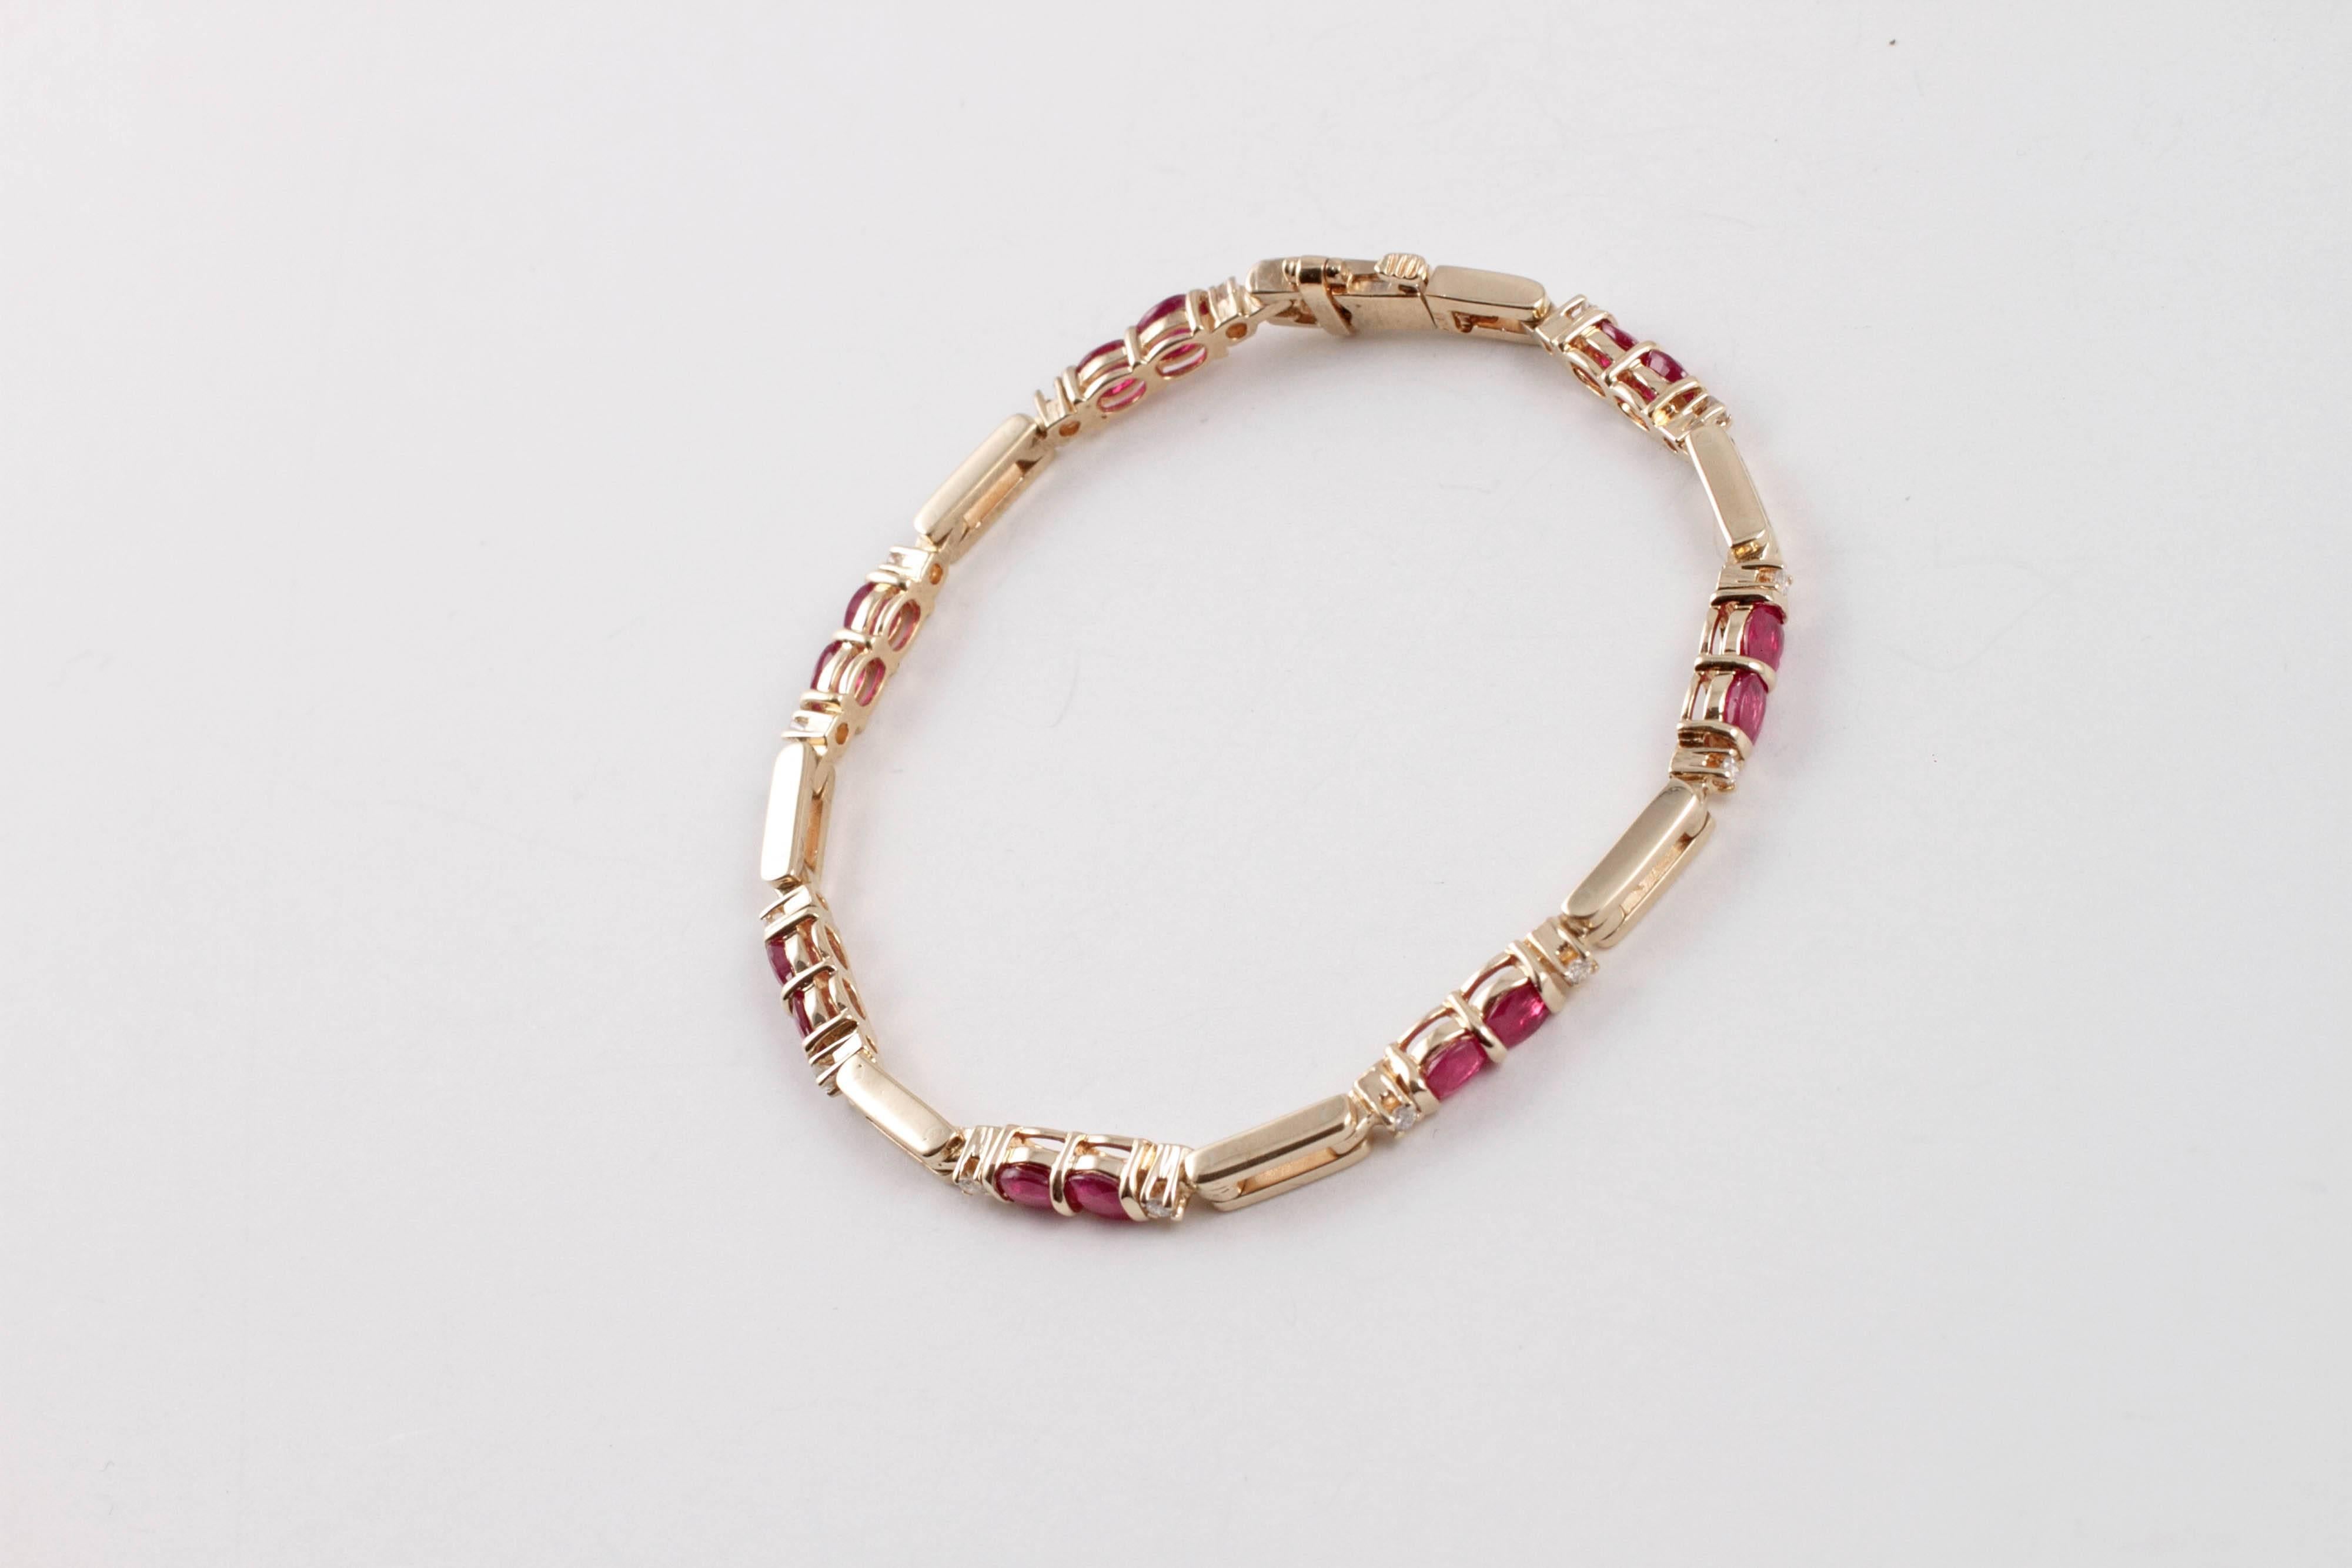 7 inch long alluring ruby and diamond bracelet perfect for that special someone!   This 14 karat yellow gold beauty will draw every eye in the room.